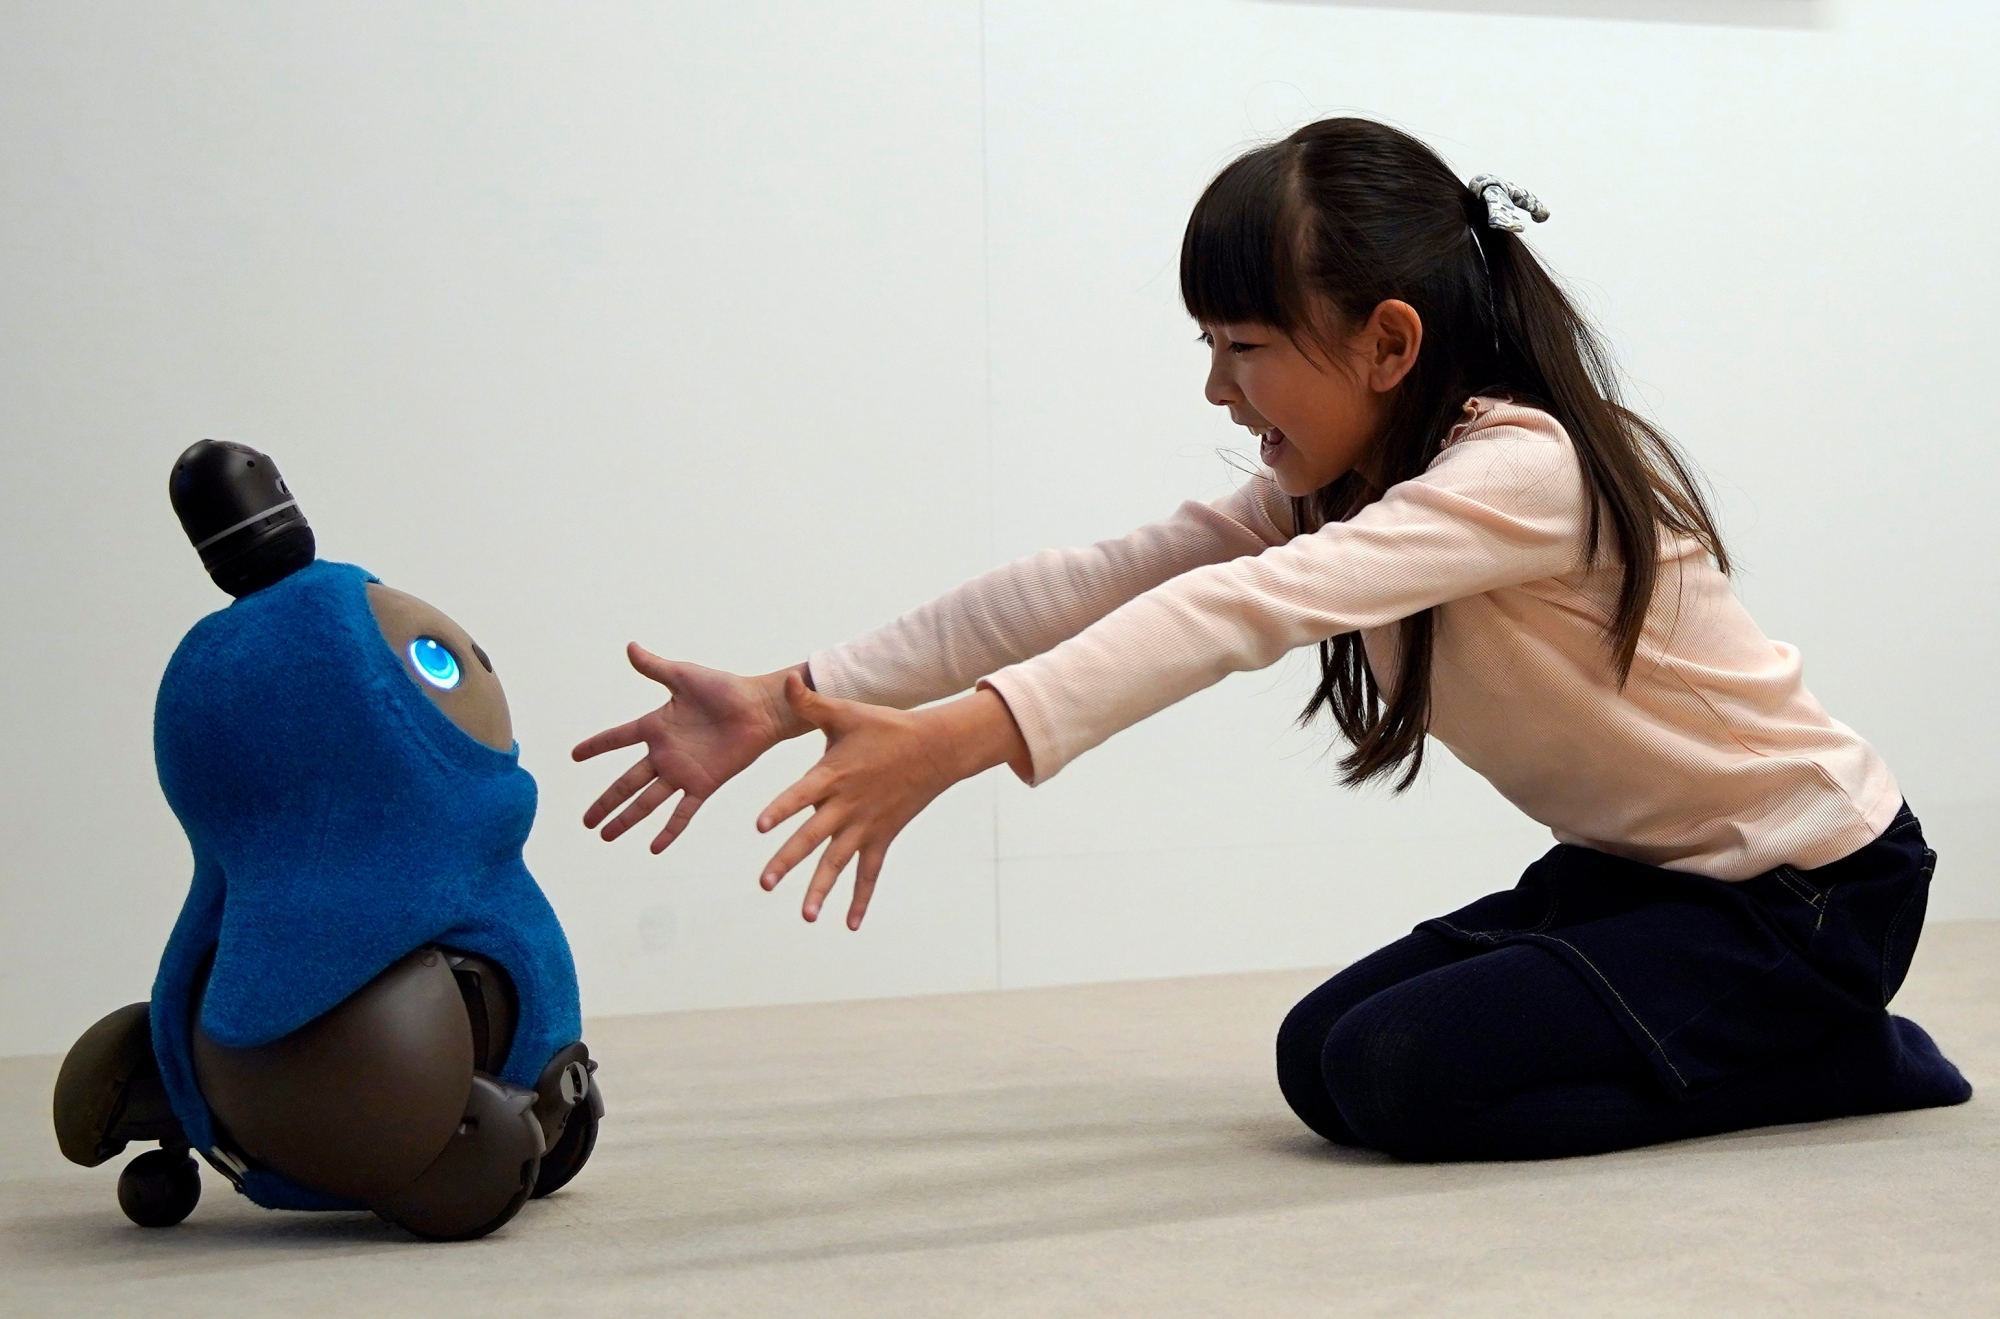 epa07238033 A young girl reaches out to GROOVE X's new home robot 'LOVOT' during its presentation at a press event in Tokyo, Japan, 18 December 2018. The company is taking orders starting 18 December and first delivery to costumers are scheduled in autumn 2019. The duo version with two LOVOT robots will be on sale at around 5,000 euros.  EPA/FRANCK ROBICHON JAPAN TECHNOLOGY LOVOT ROBOT